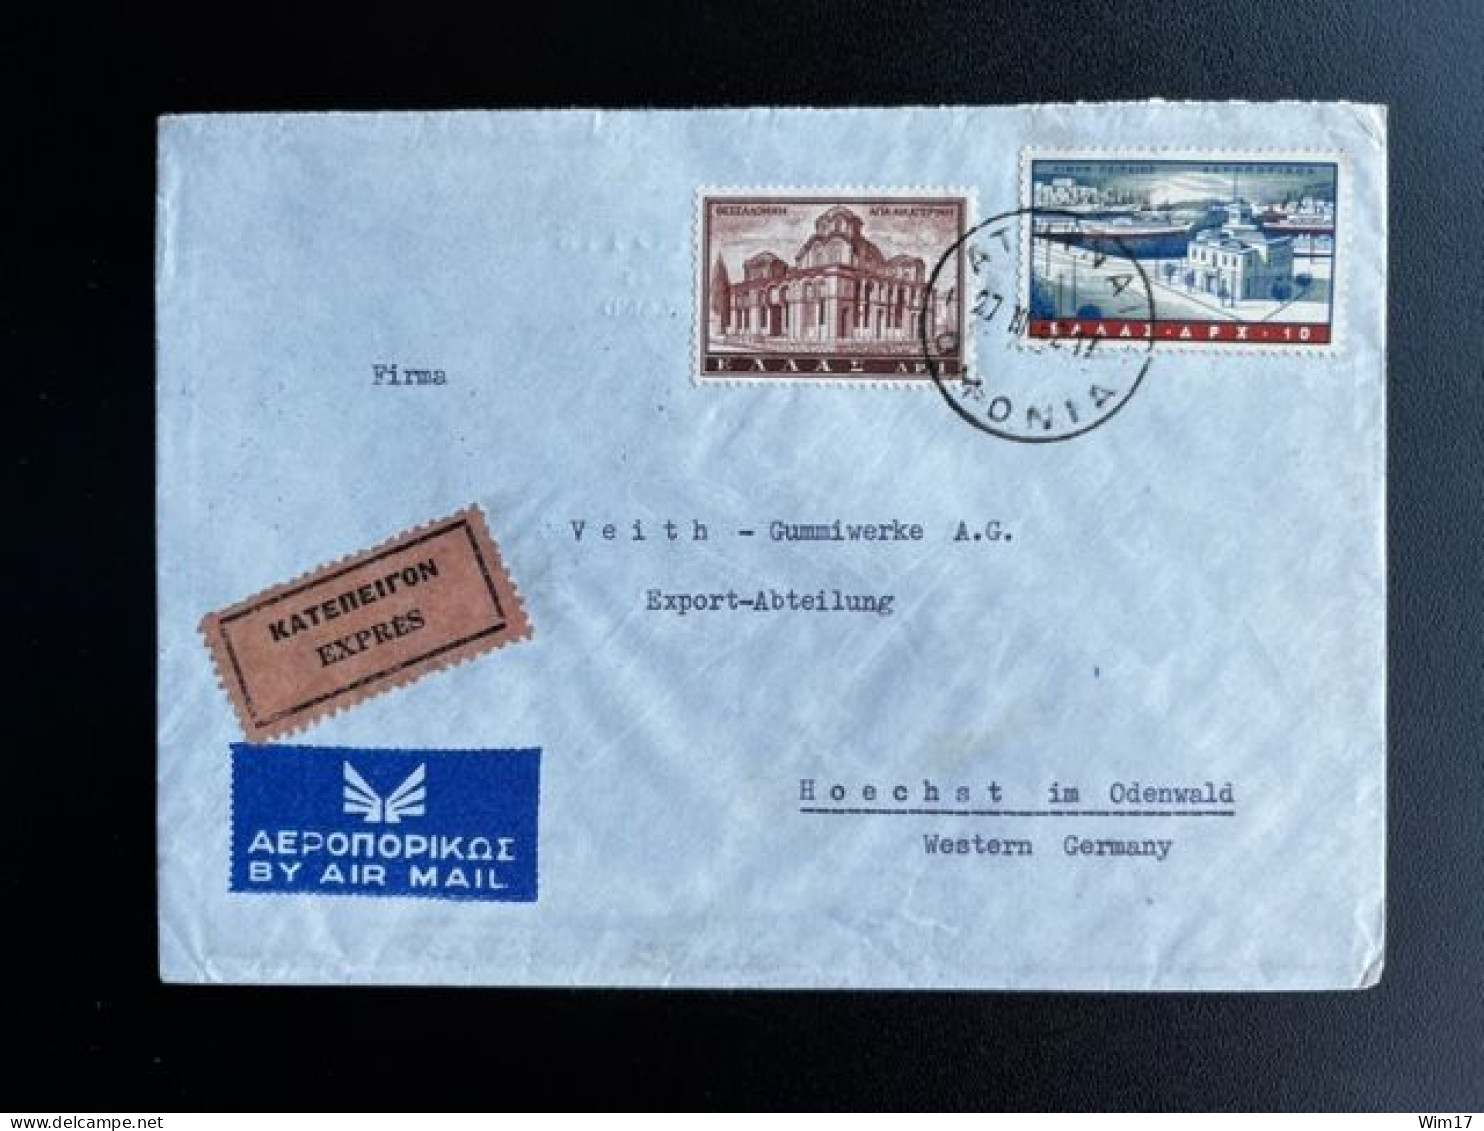 GREECE 1962 EXPRESS LETTER ATHENS ATHINAI TO HOCHST IM ODENWALD 27-03-1962 GRIEKENLAND  EXPRES - Covers & Documents